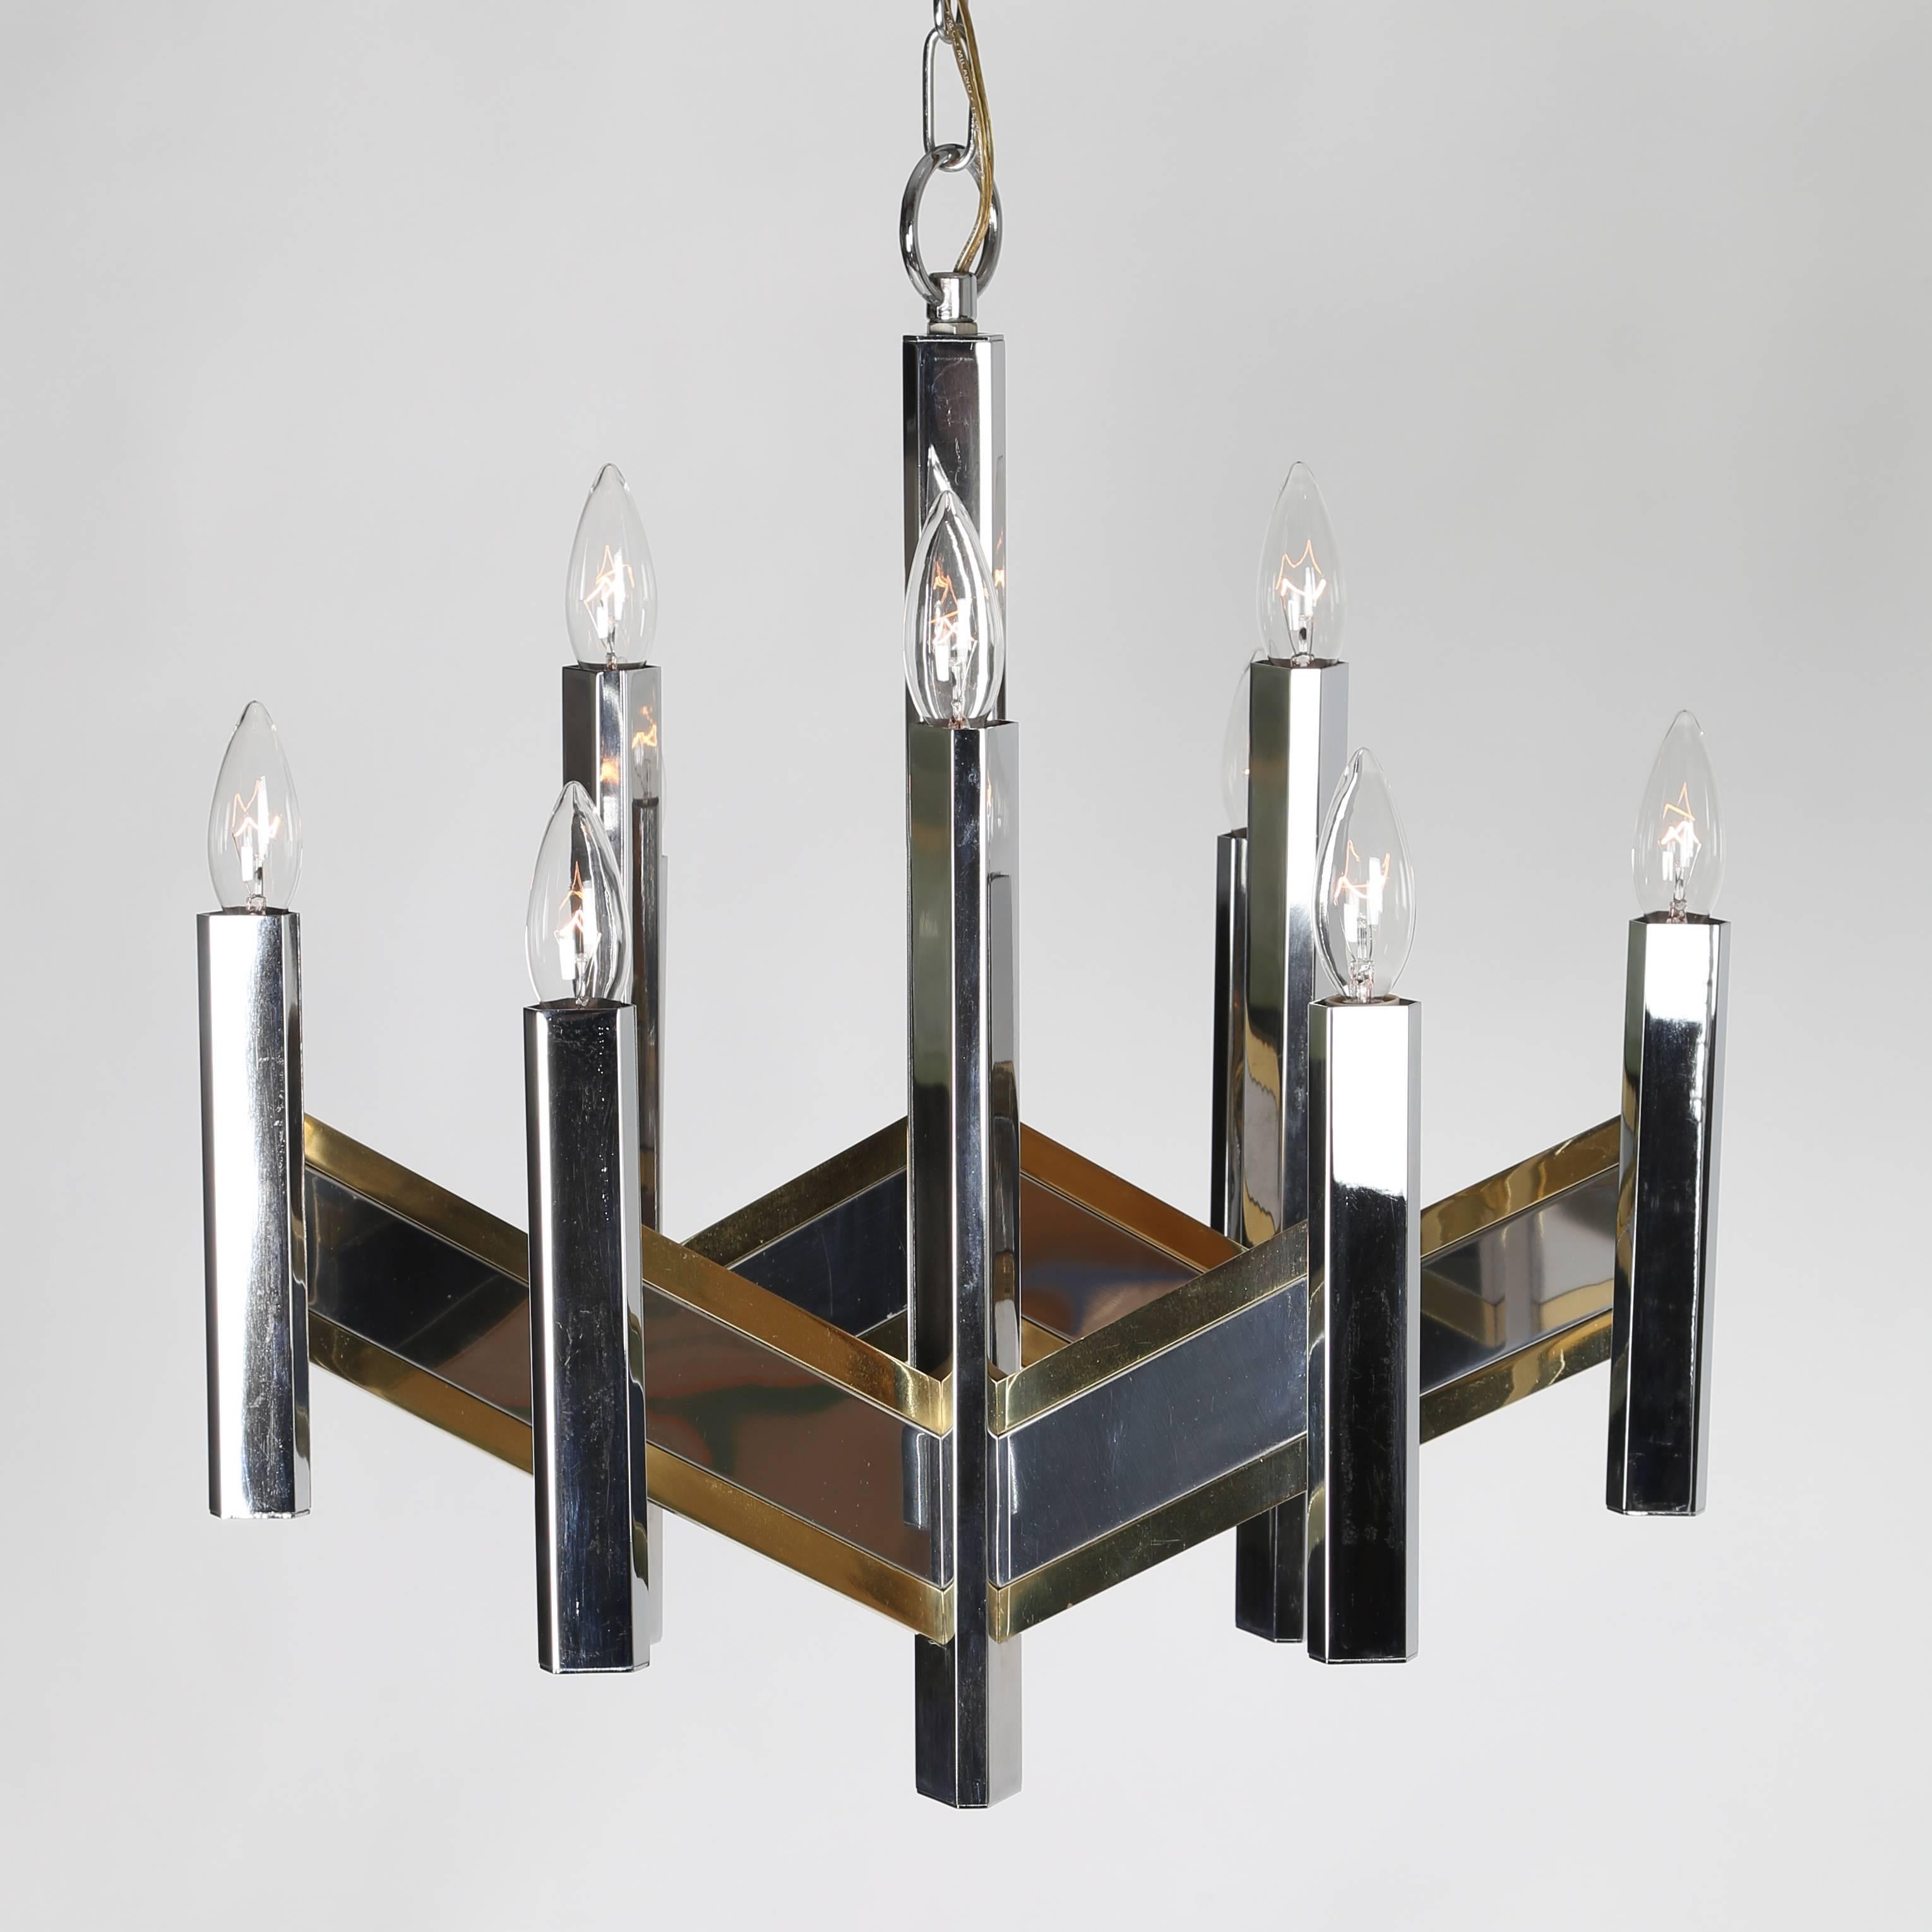 Lovely 1960s Sciolari for Lightolier chandelier with a zig-zag chevron pattern in mixed metals. Nine sockets hold candelabra-base bulbs. Original chrome chain and ceiling canopy. Fixture 20